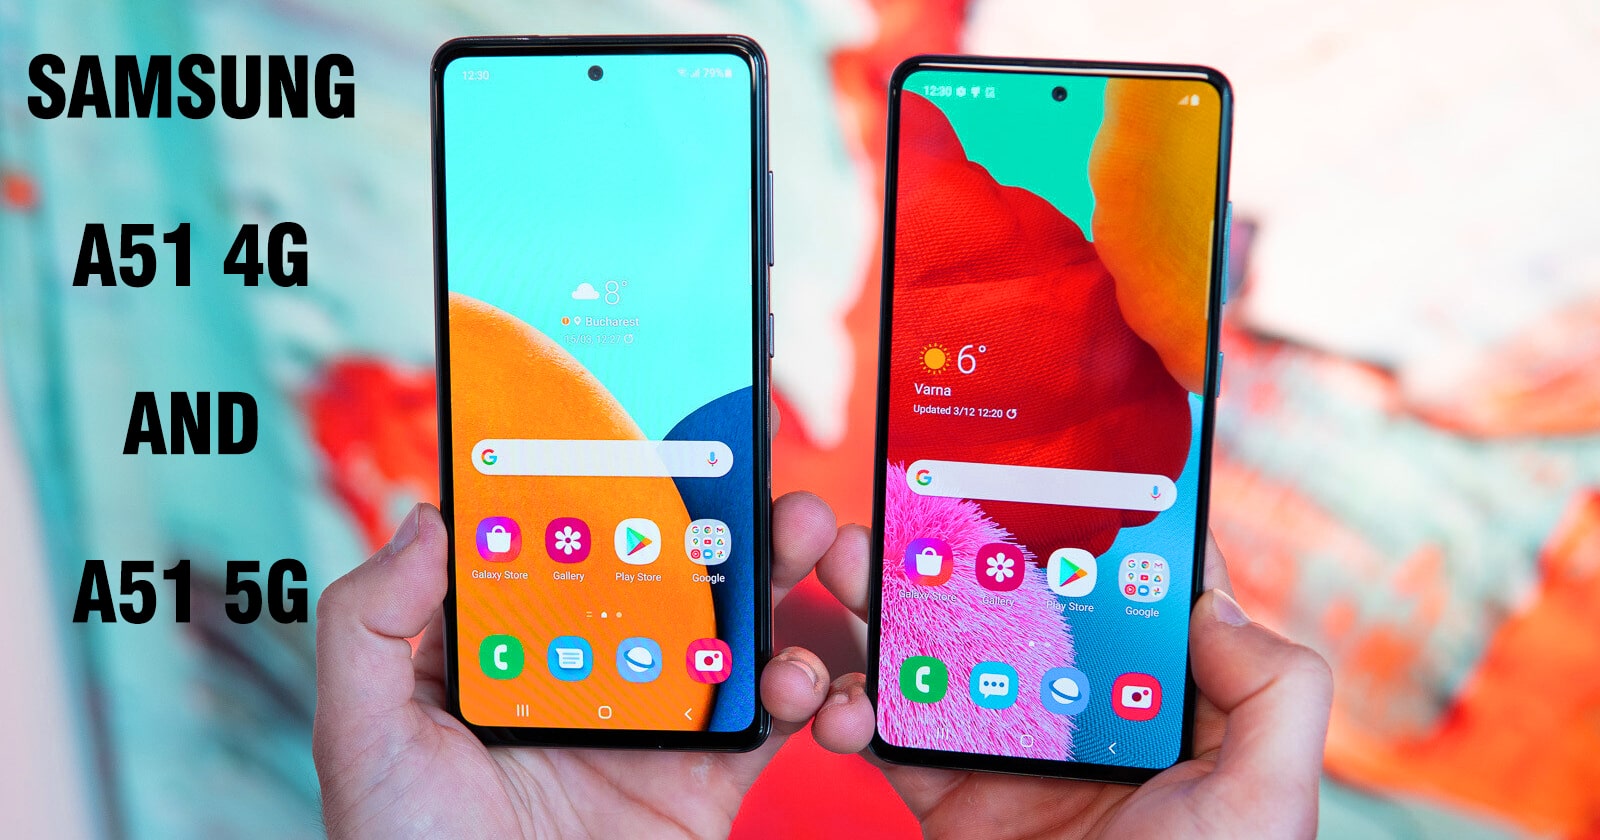 What Is the Difference Between Samsung A51 4G and 5G